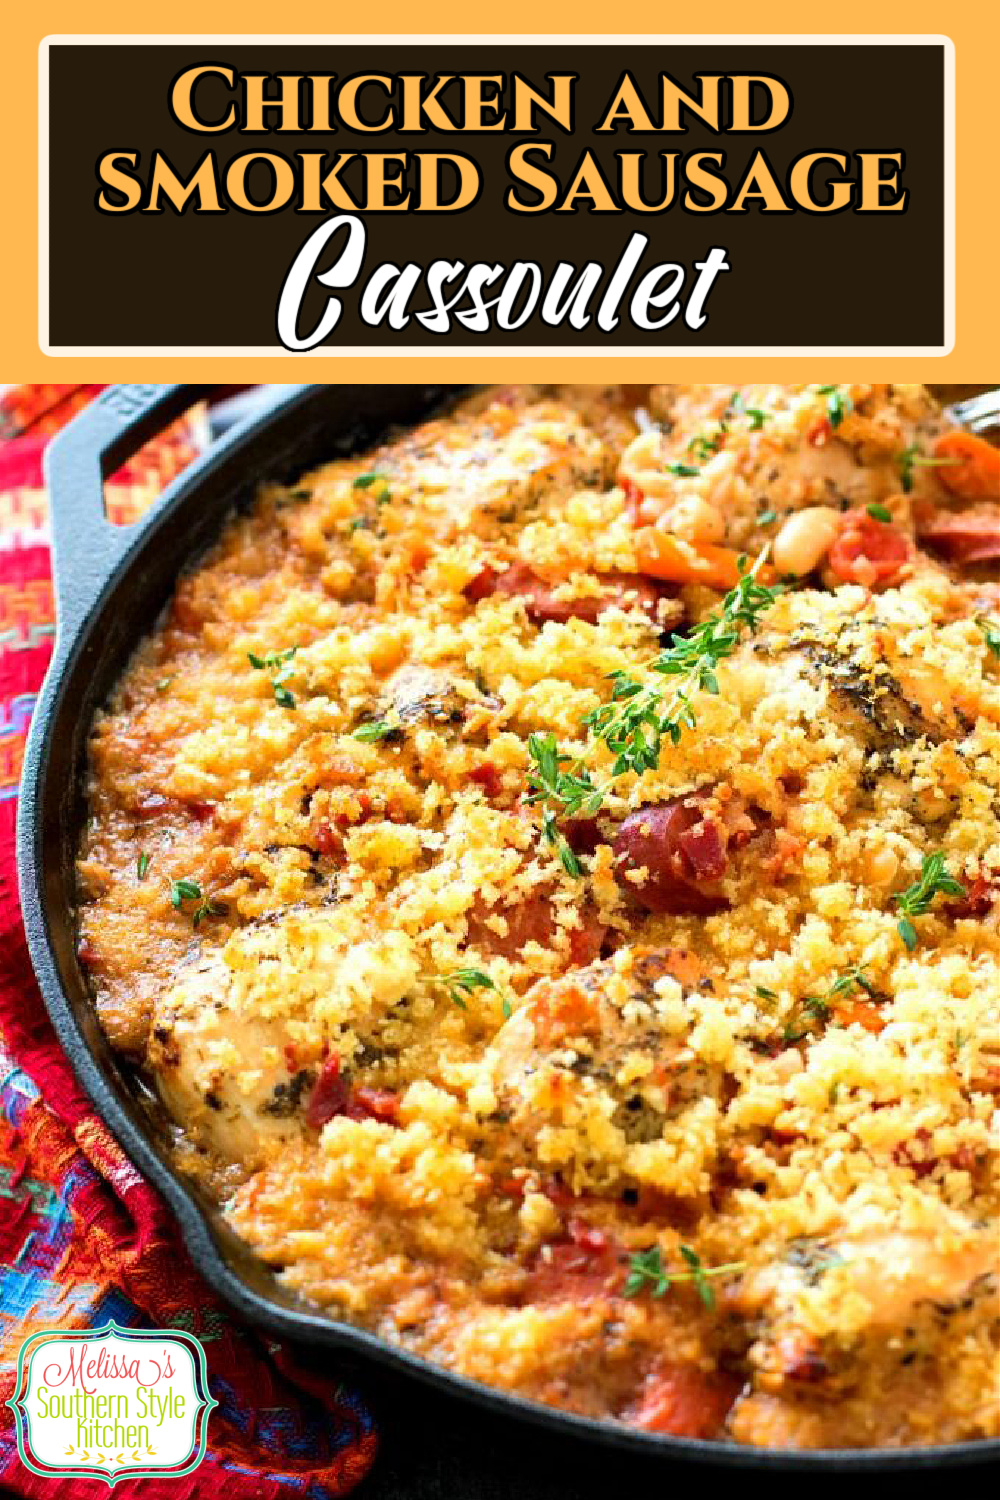 Seasoned chicken breasts and smoked sausages are simmered with fragrant vegetables then baked until the topping is crispy and golden #chickencassoulet #chickencasserolerecipes #chickenbreastrecipes #skilletmeals #southernfood #southernrecipes #food #recipes #dinnerideas #smokedsausages via @melissasssk